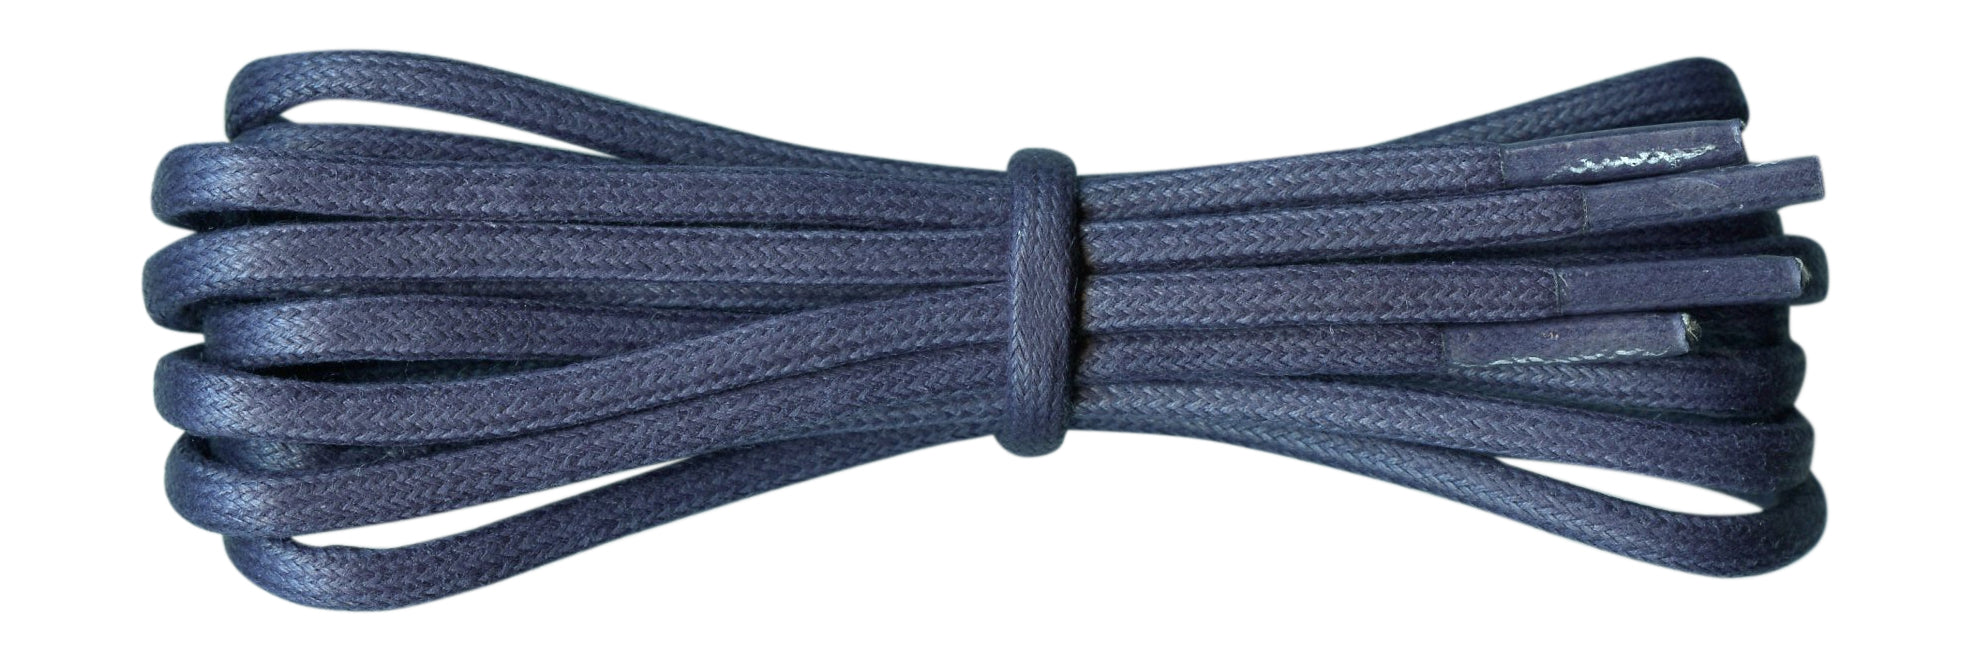 Thick Navy waxed cotton boot laces 4.5 mm - fabmania shoe laces